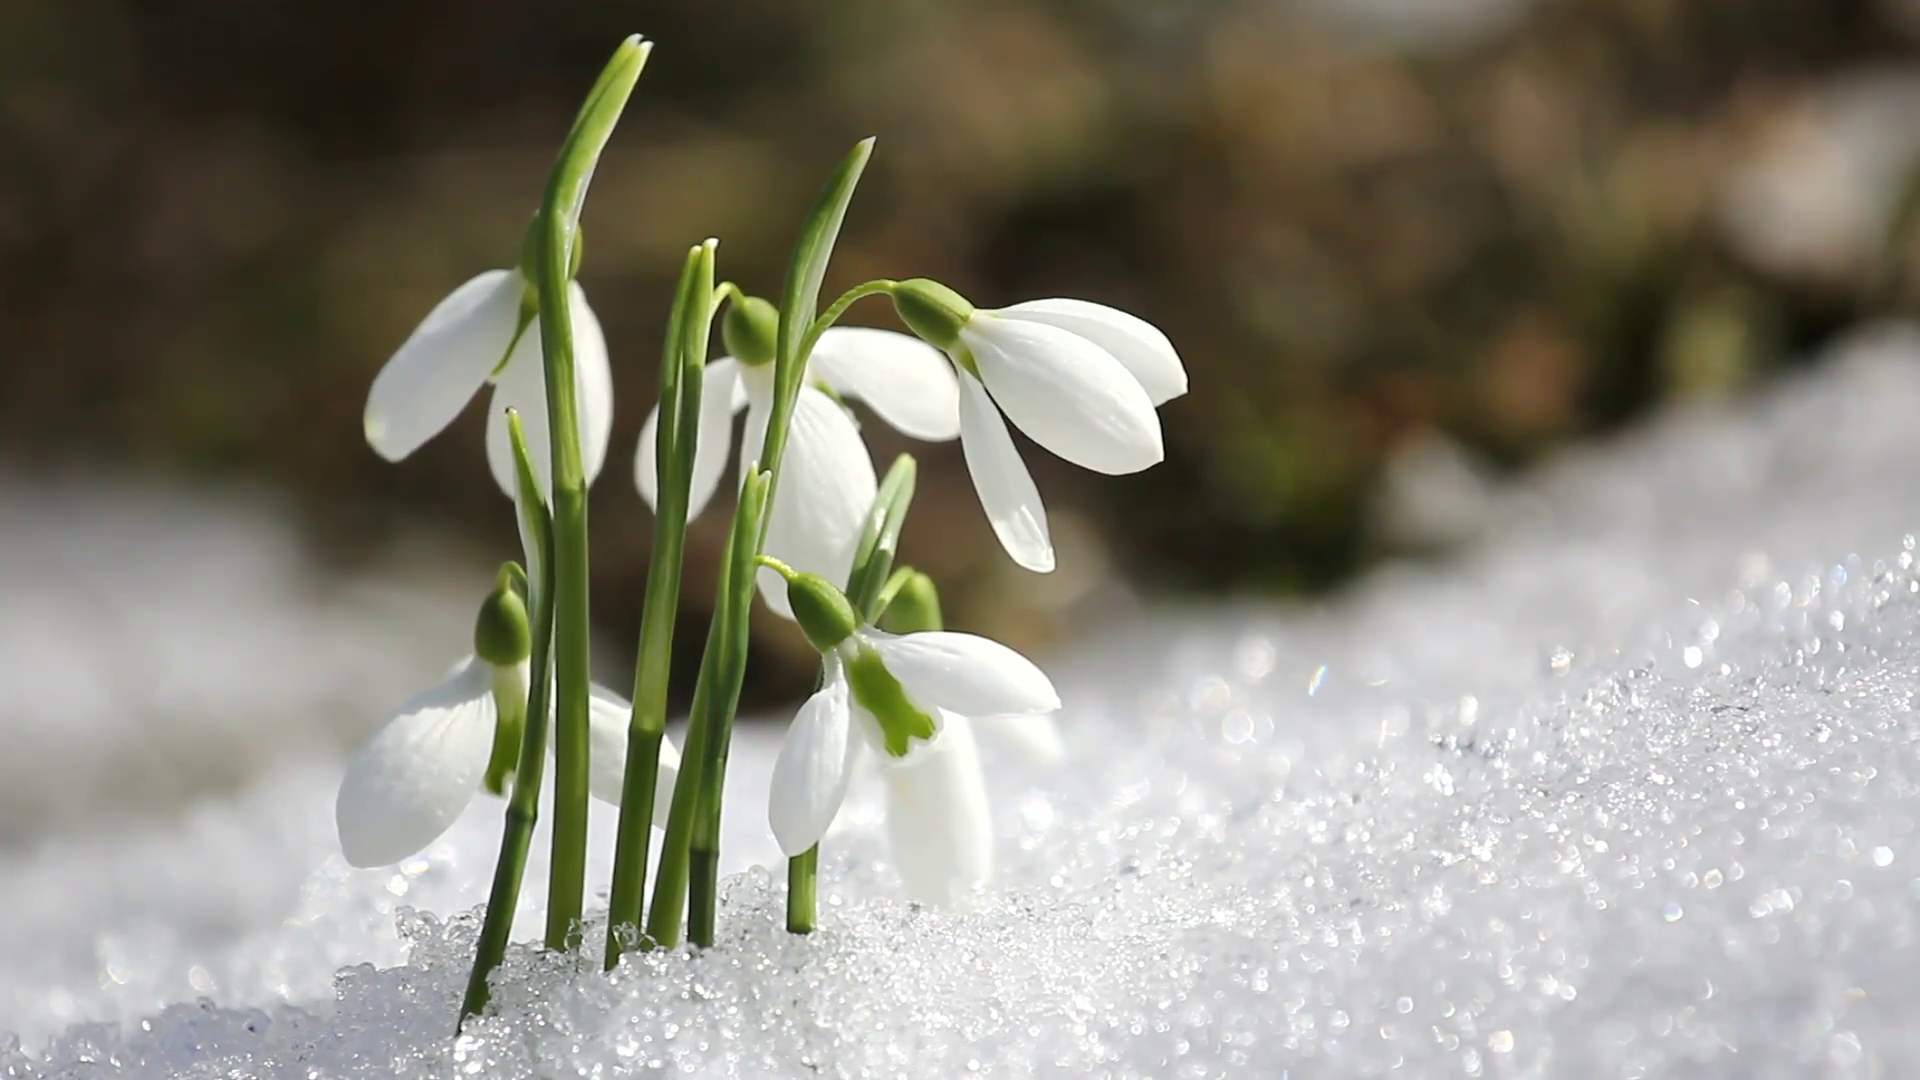 Snowdrops flowers from the snow, ending winter and coming spring ...